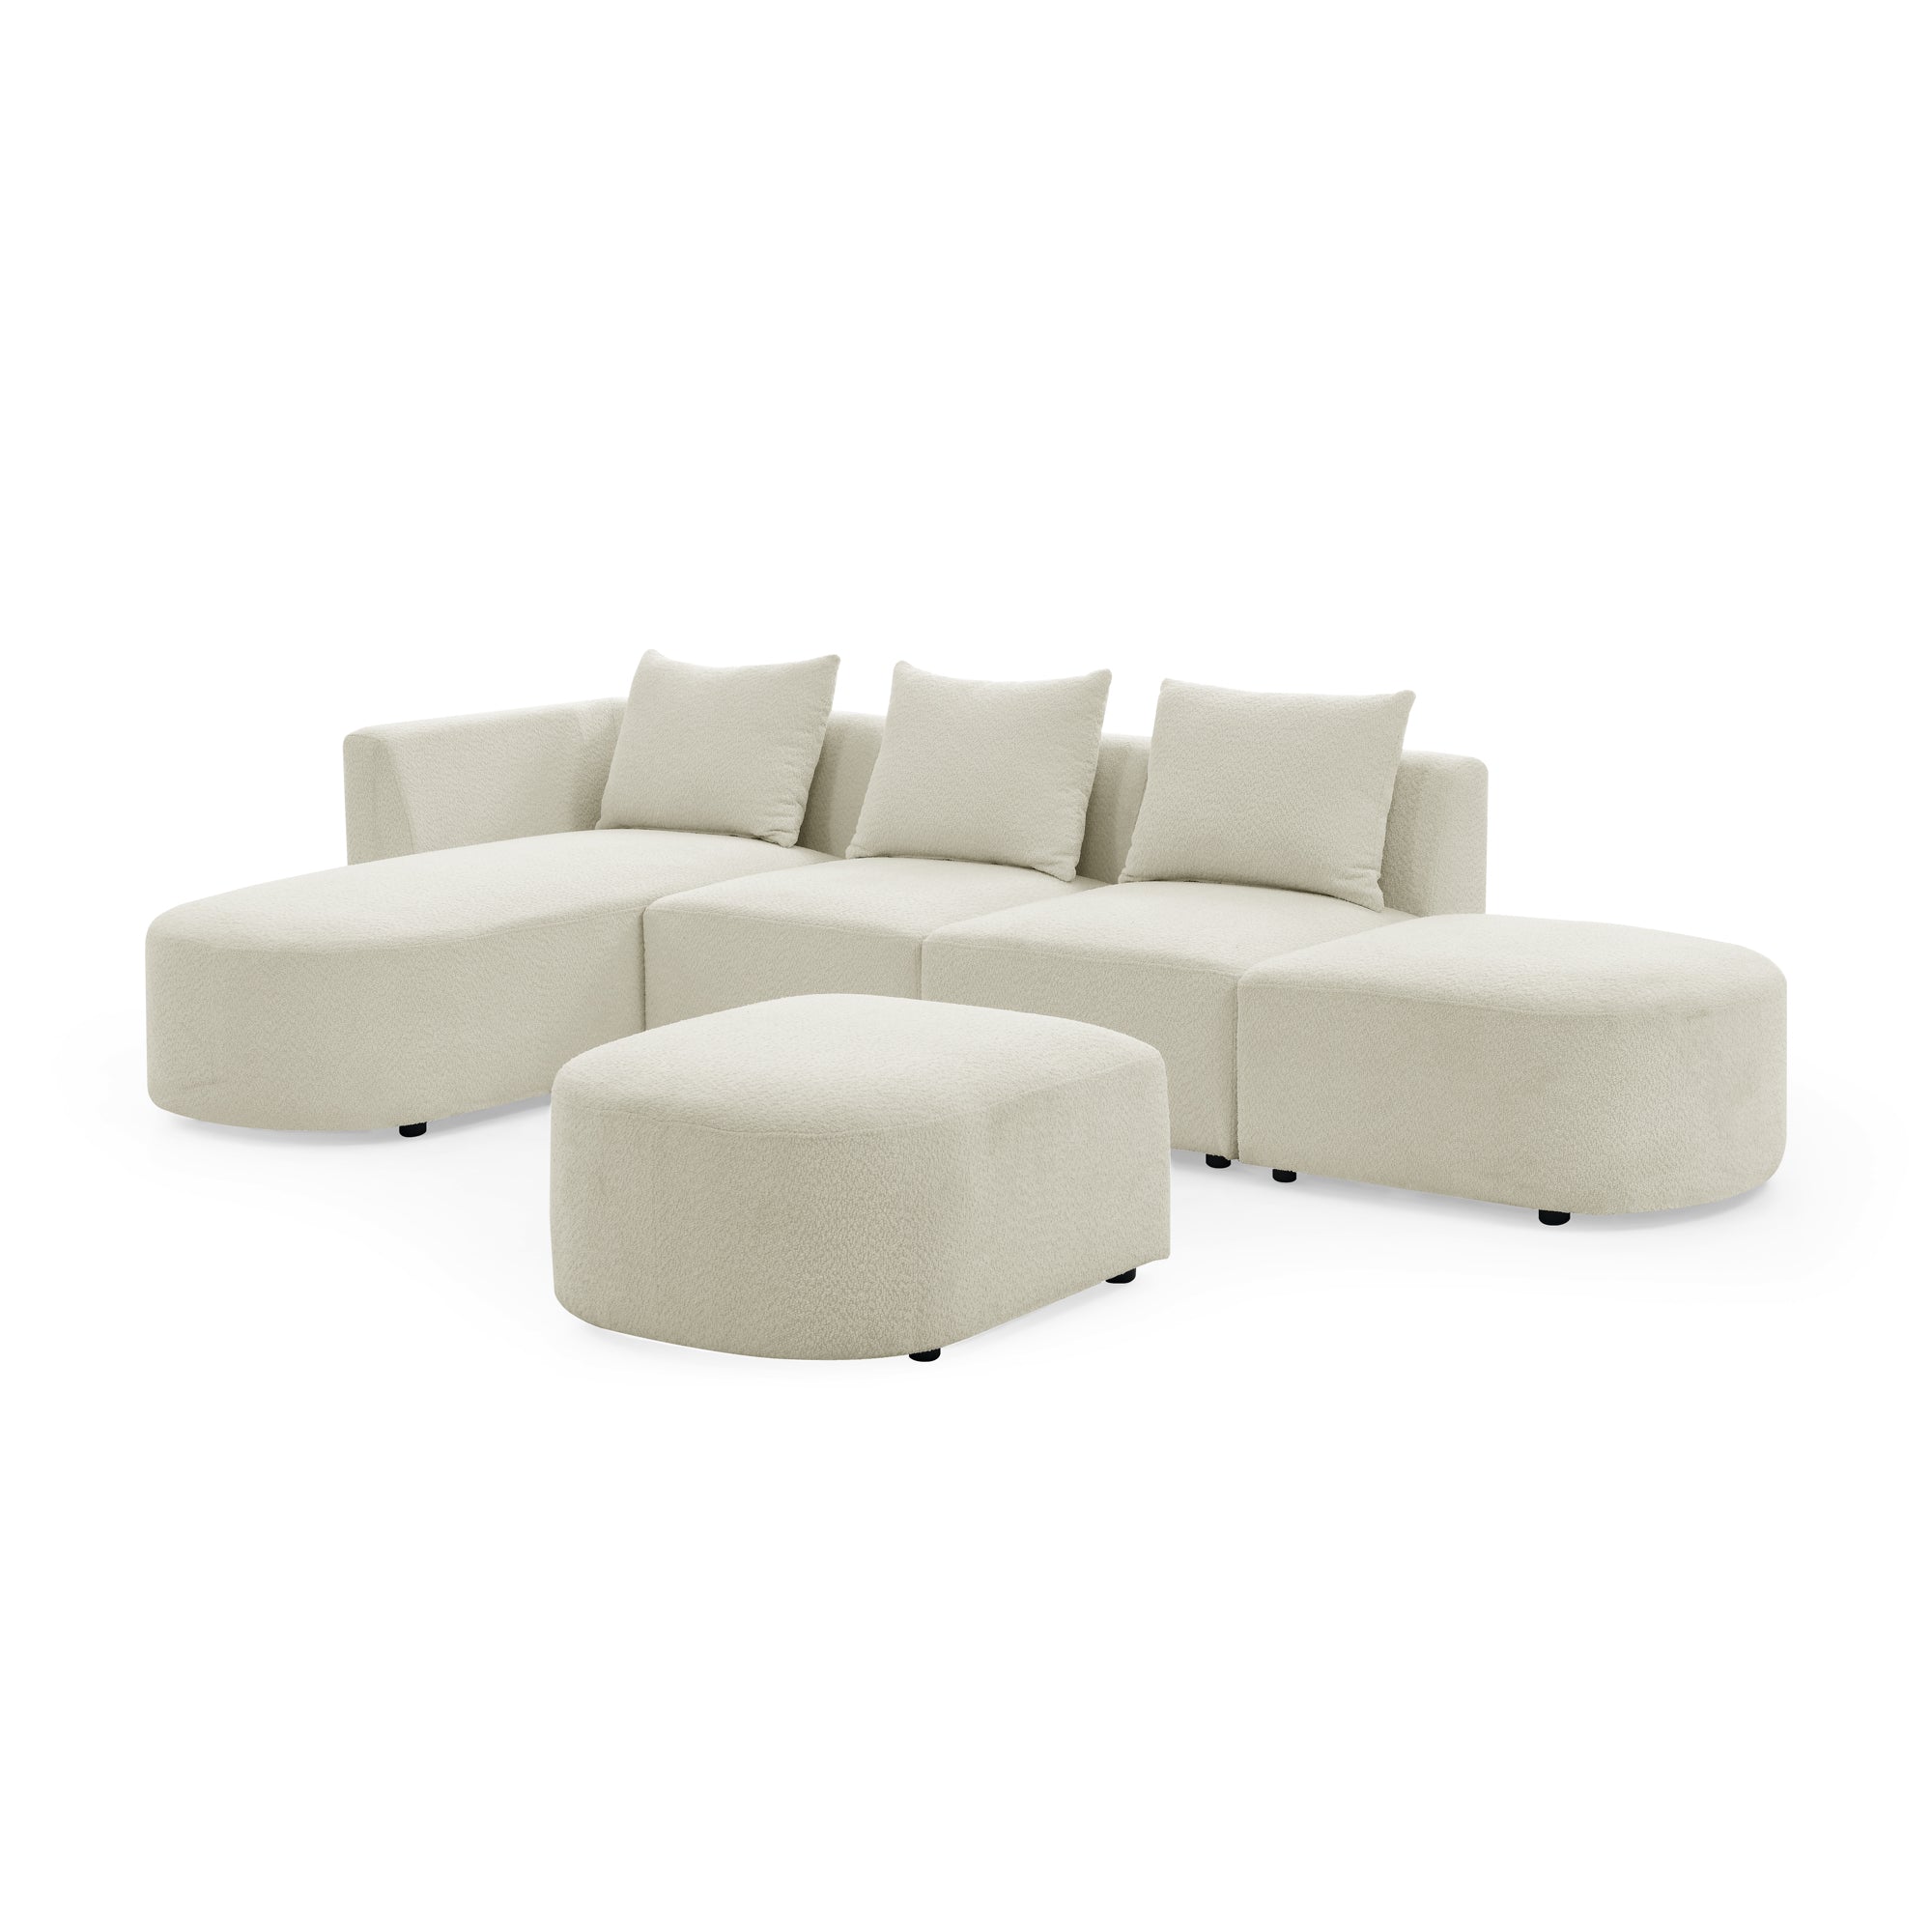 Bellemave 113" L-Shape Sectional Sofa with Left Side Chaise and Ottoman, Modular Sofa, DIY Combination Bellemave